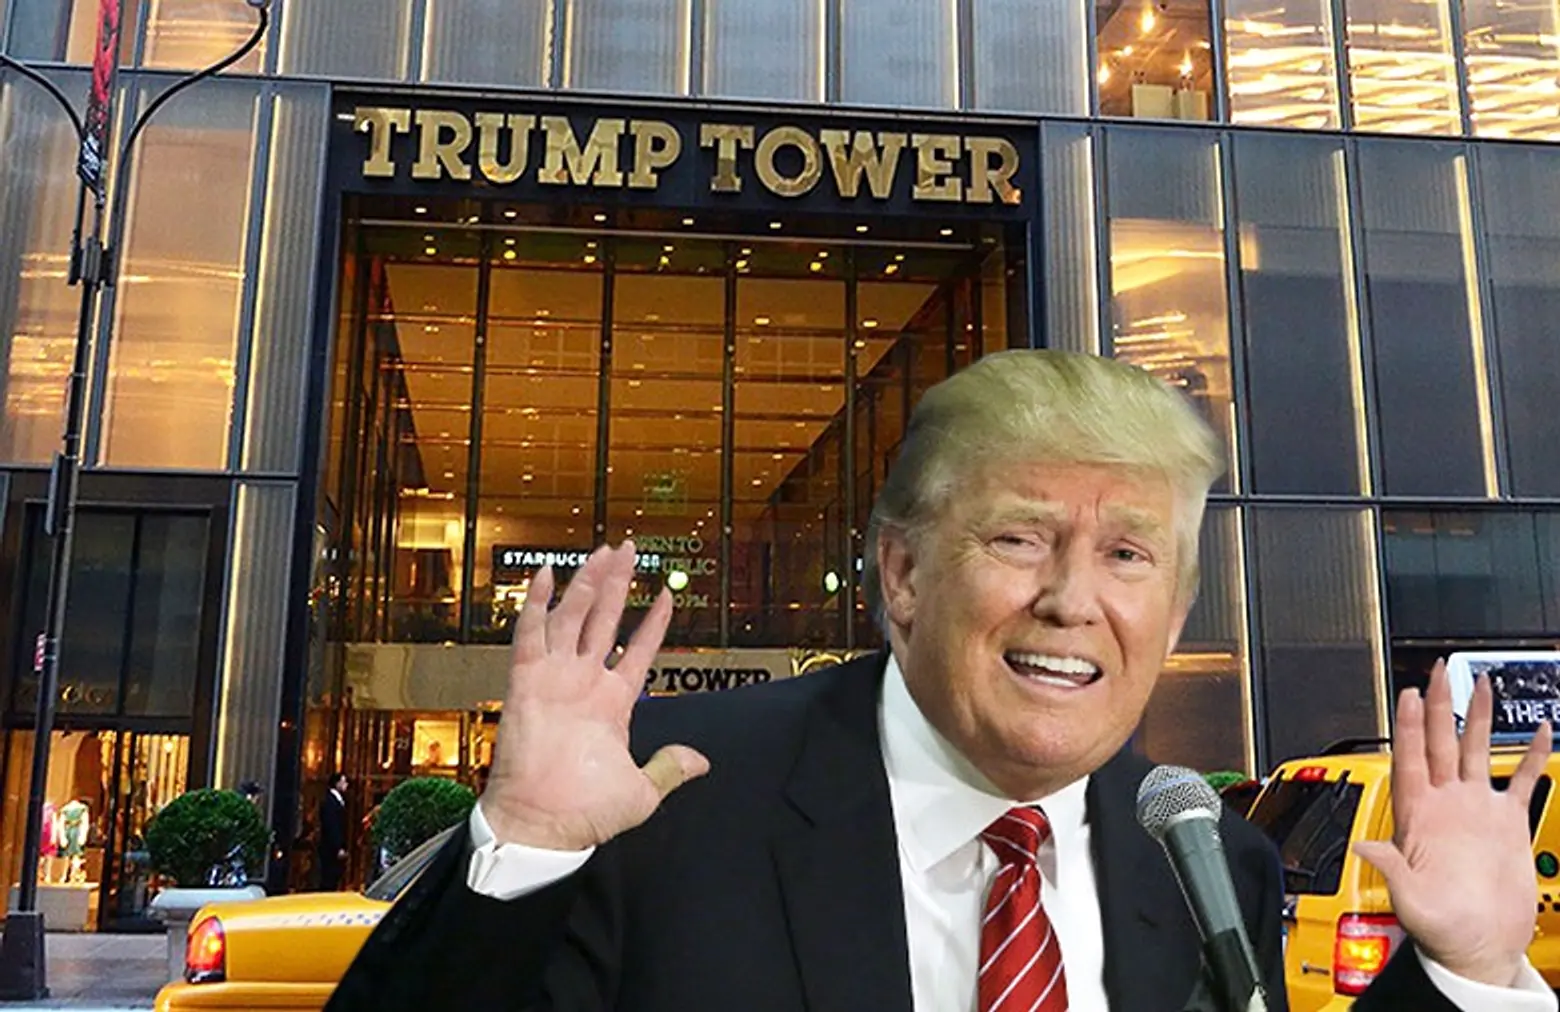 Congress budget deal will reimburse NYC for Trump Tower security in ‘protection package’ split with Florida